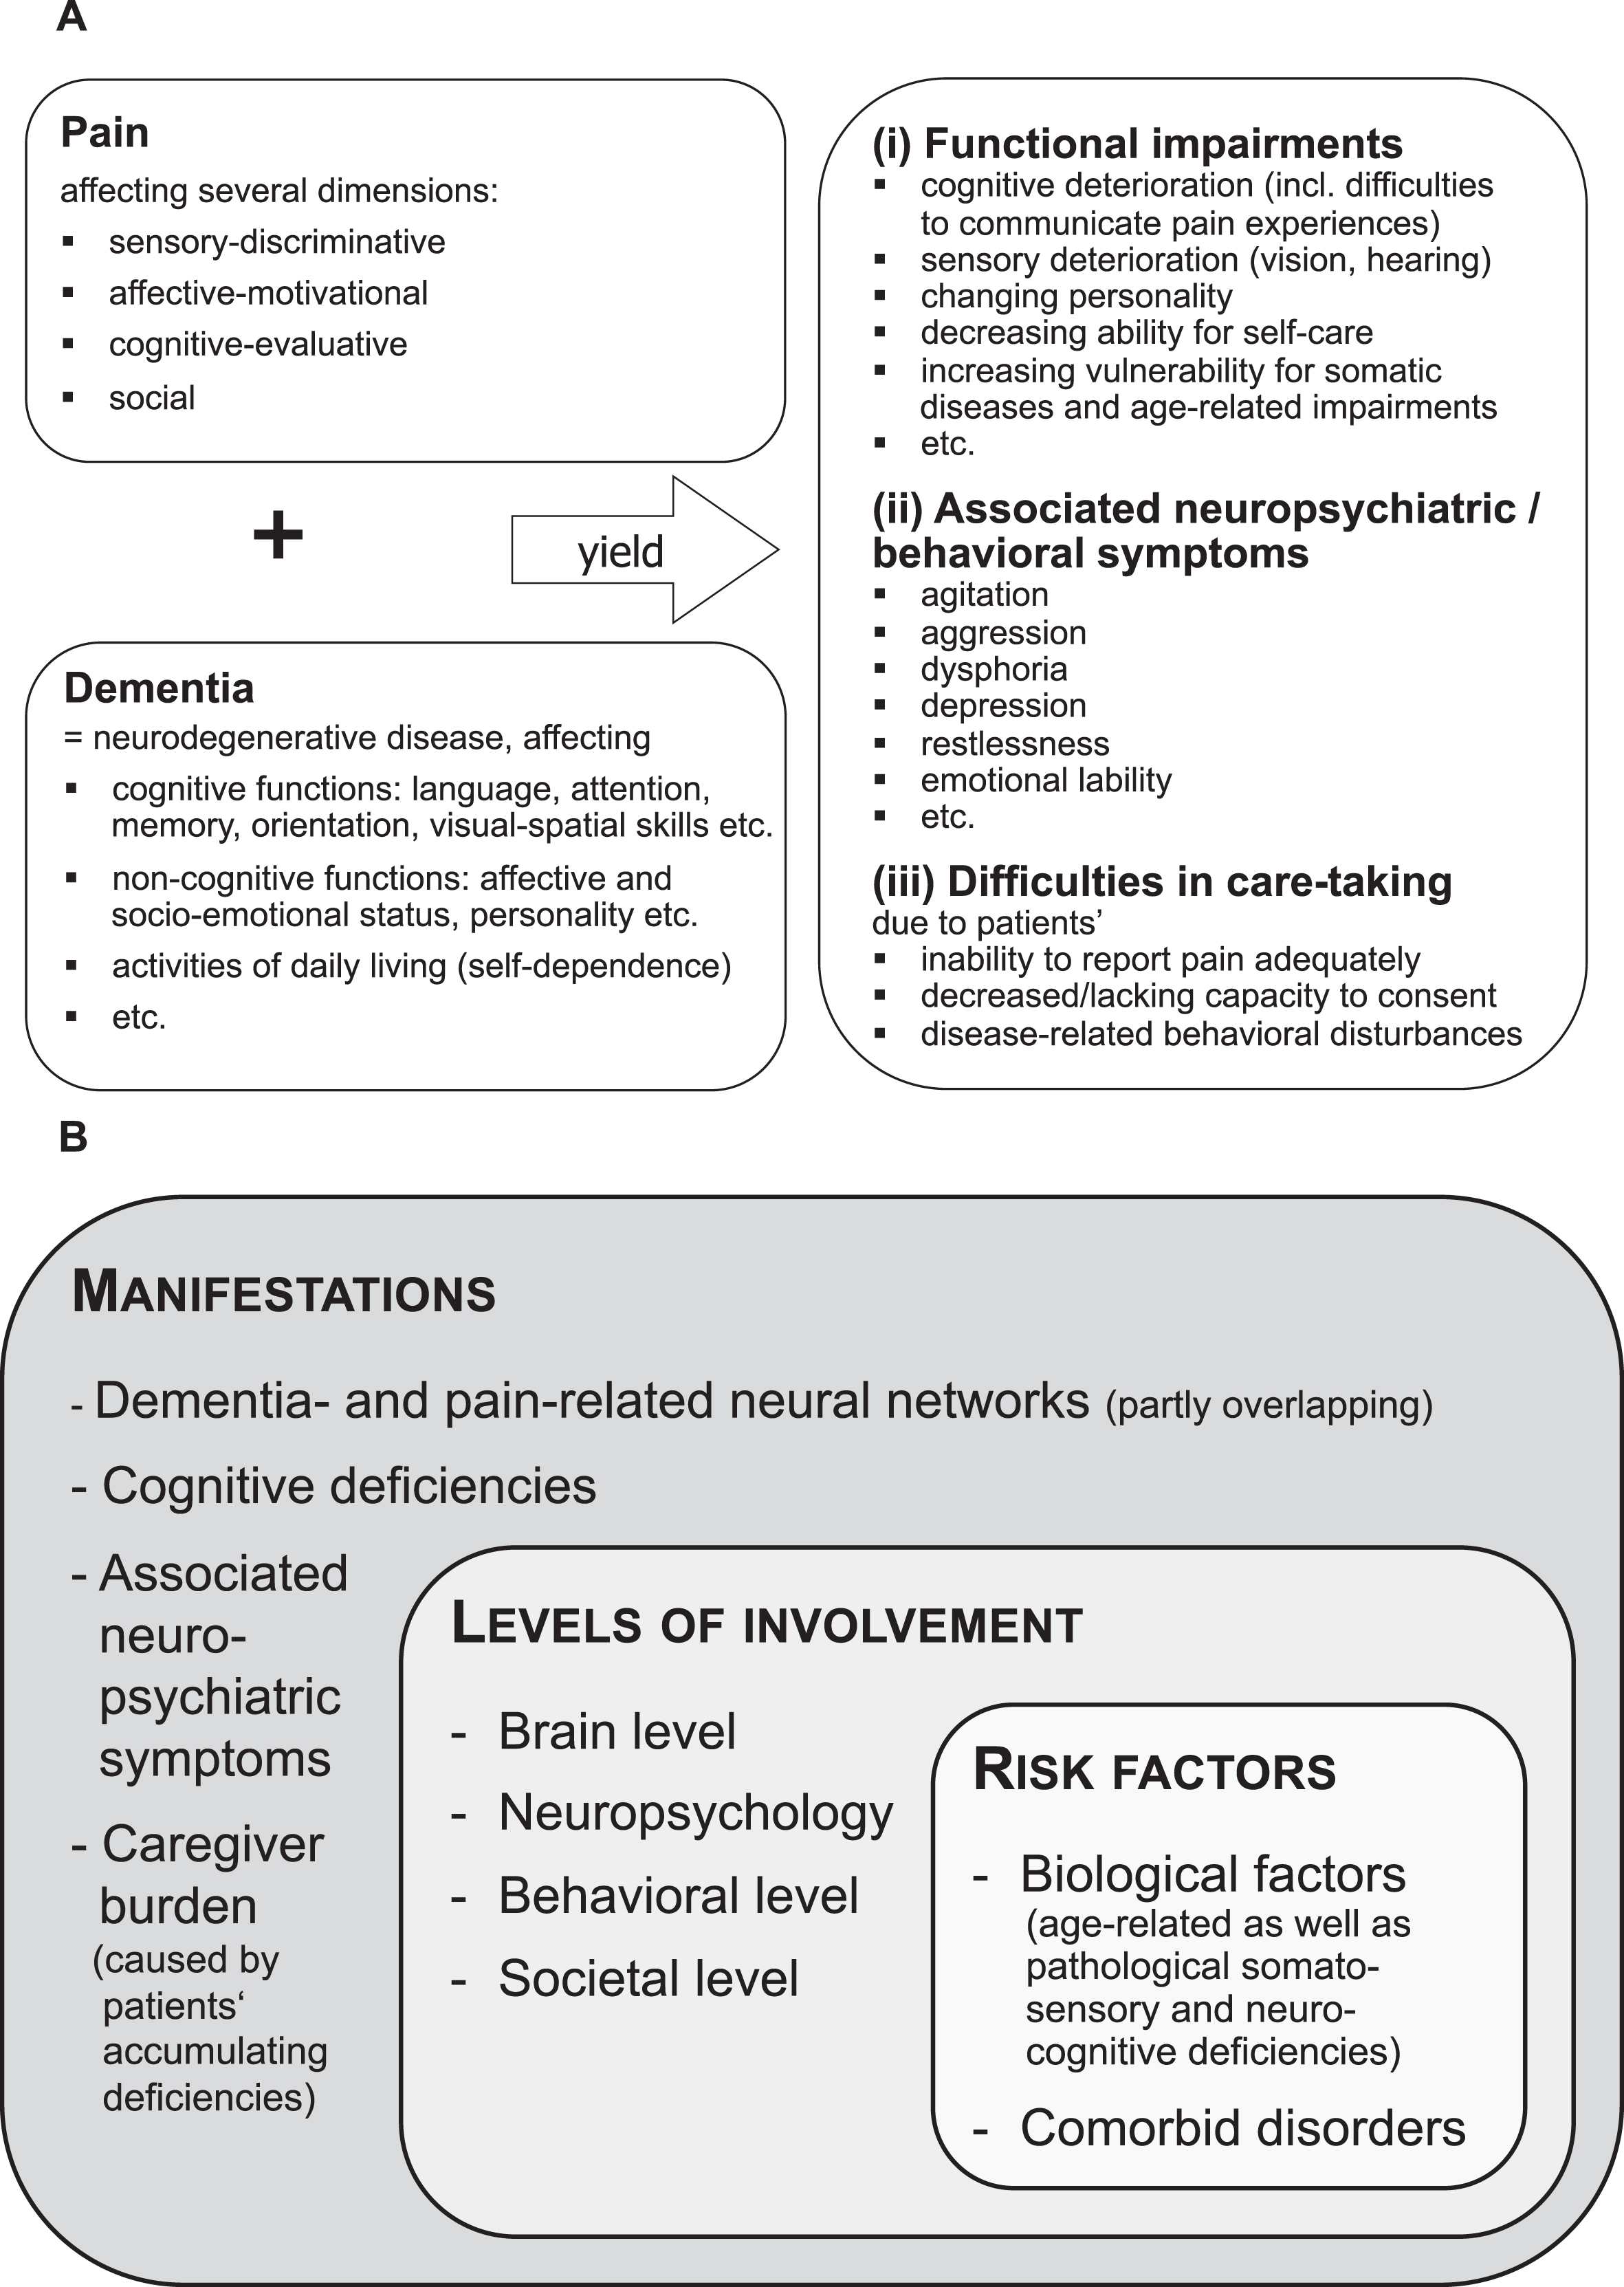 A) Schematic representation of the clinical manifestations of pain in dementia. B) An integrative perspective of pain in dementia, focusing on potential risk factors and heterogeneity (inner-most rectangle), different levels of involvement (middle rectangle), and manifestations (outer rectangle). Please note that in each patient (and depending on dementia progression, responsiveness to treatment, etc.), all or some of these factors may be intertwined, thus yielding a unique clinical picture that may change over time and with dementia progression.